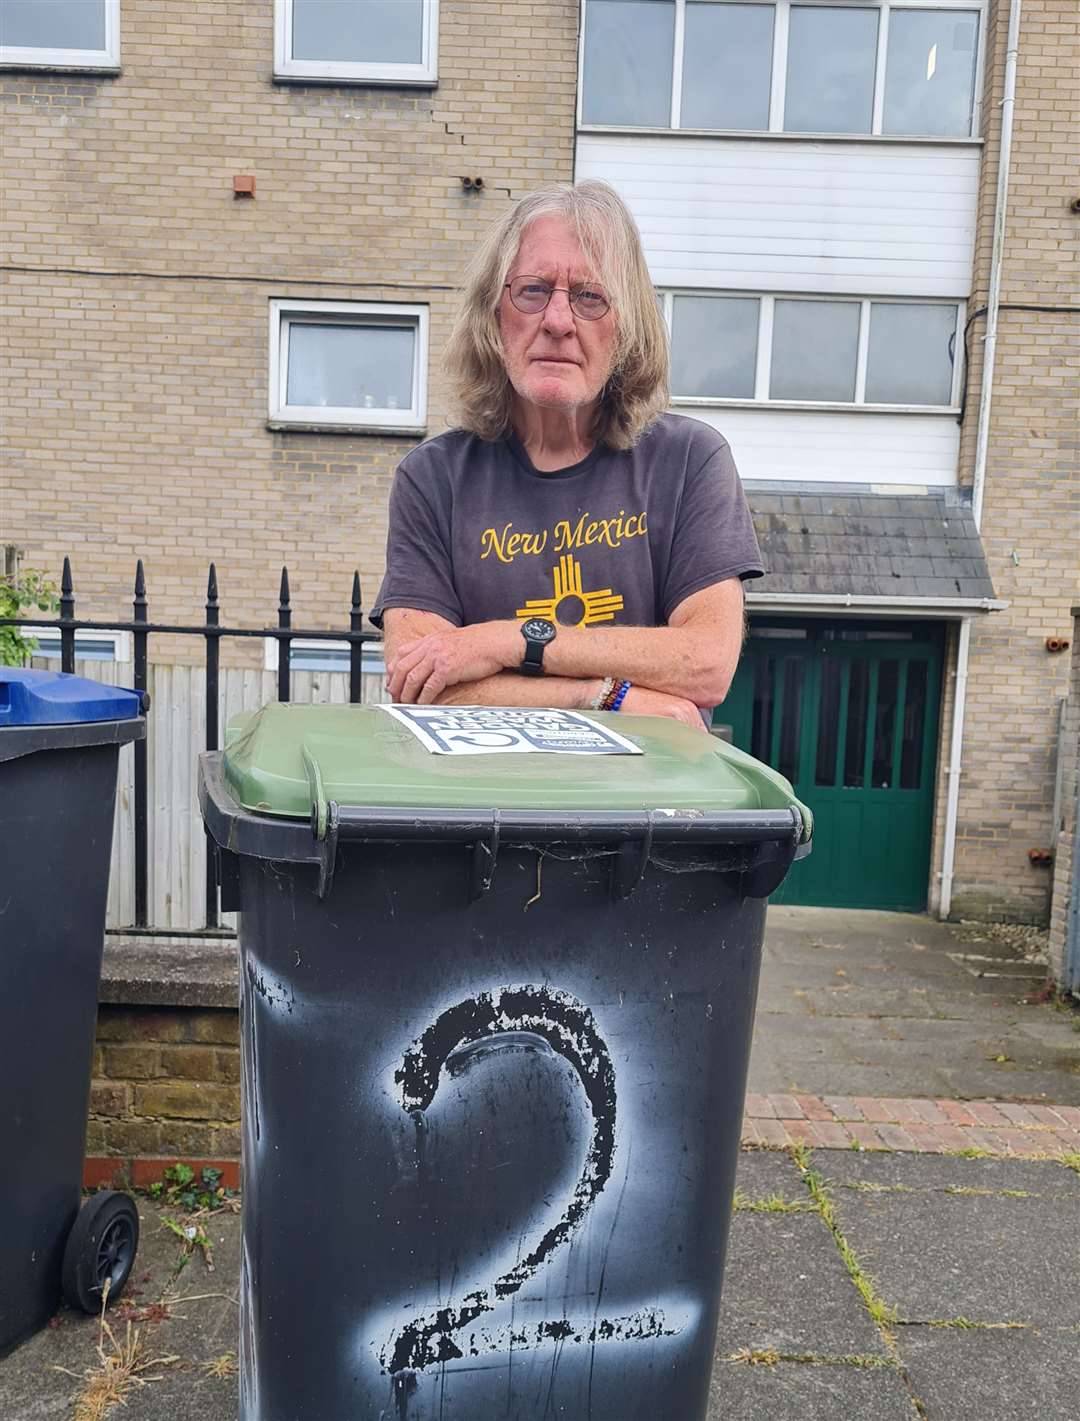 Andy Ashenhurst from Canterbury with his green bin